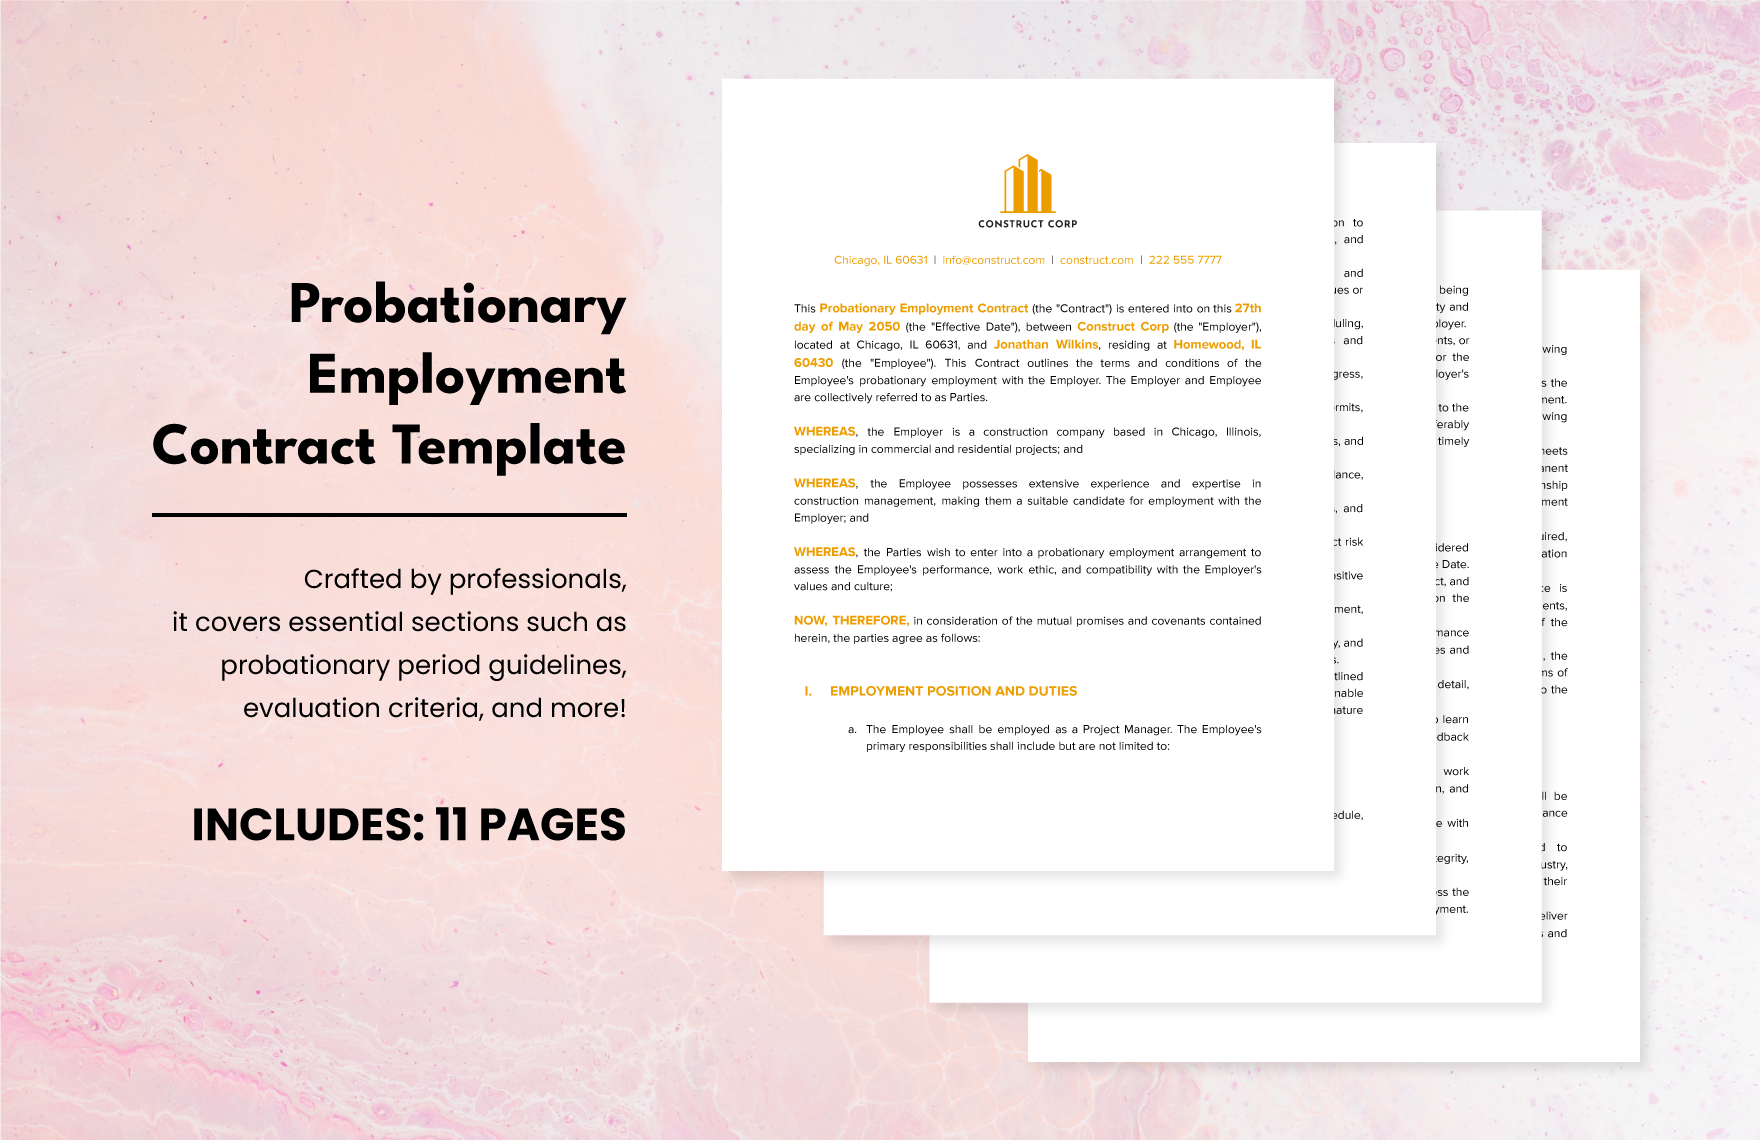 Probationary Employment Contract Template